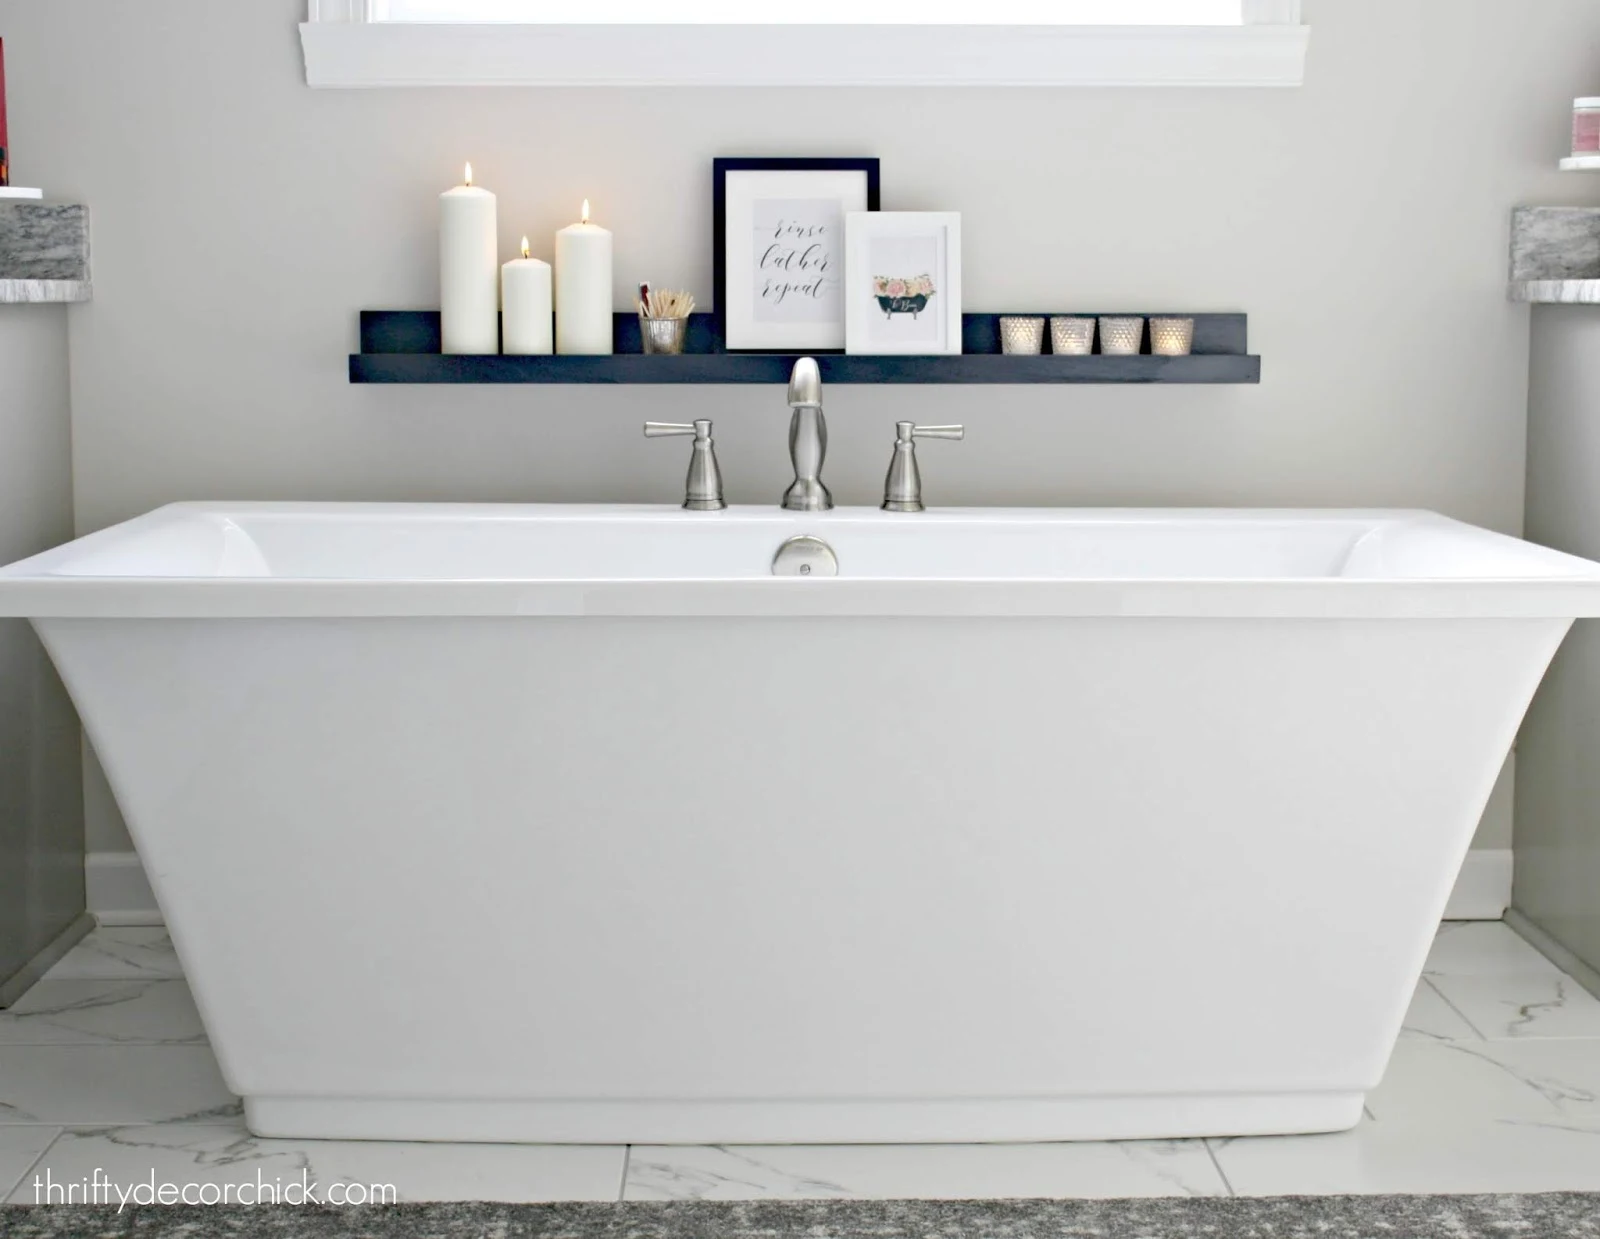 DIY picture ledge by tub